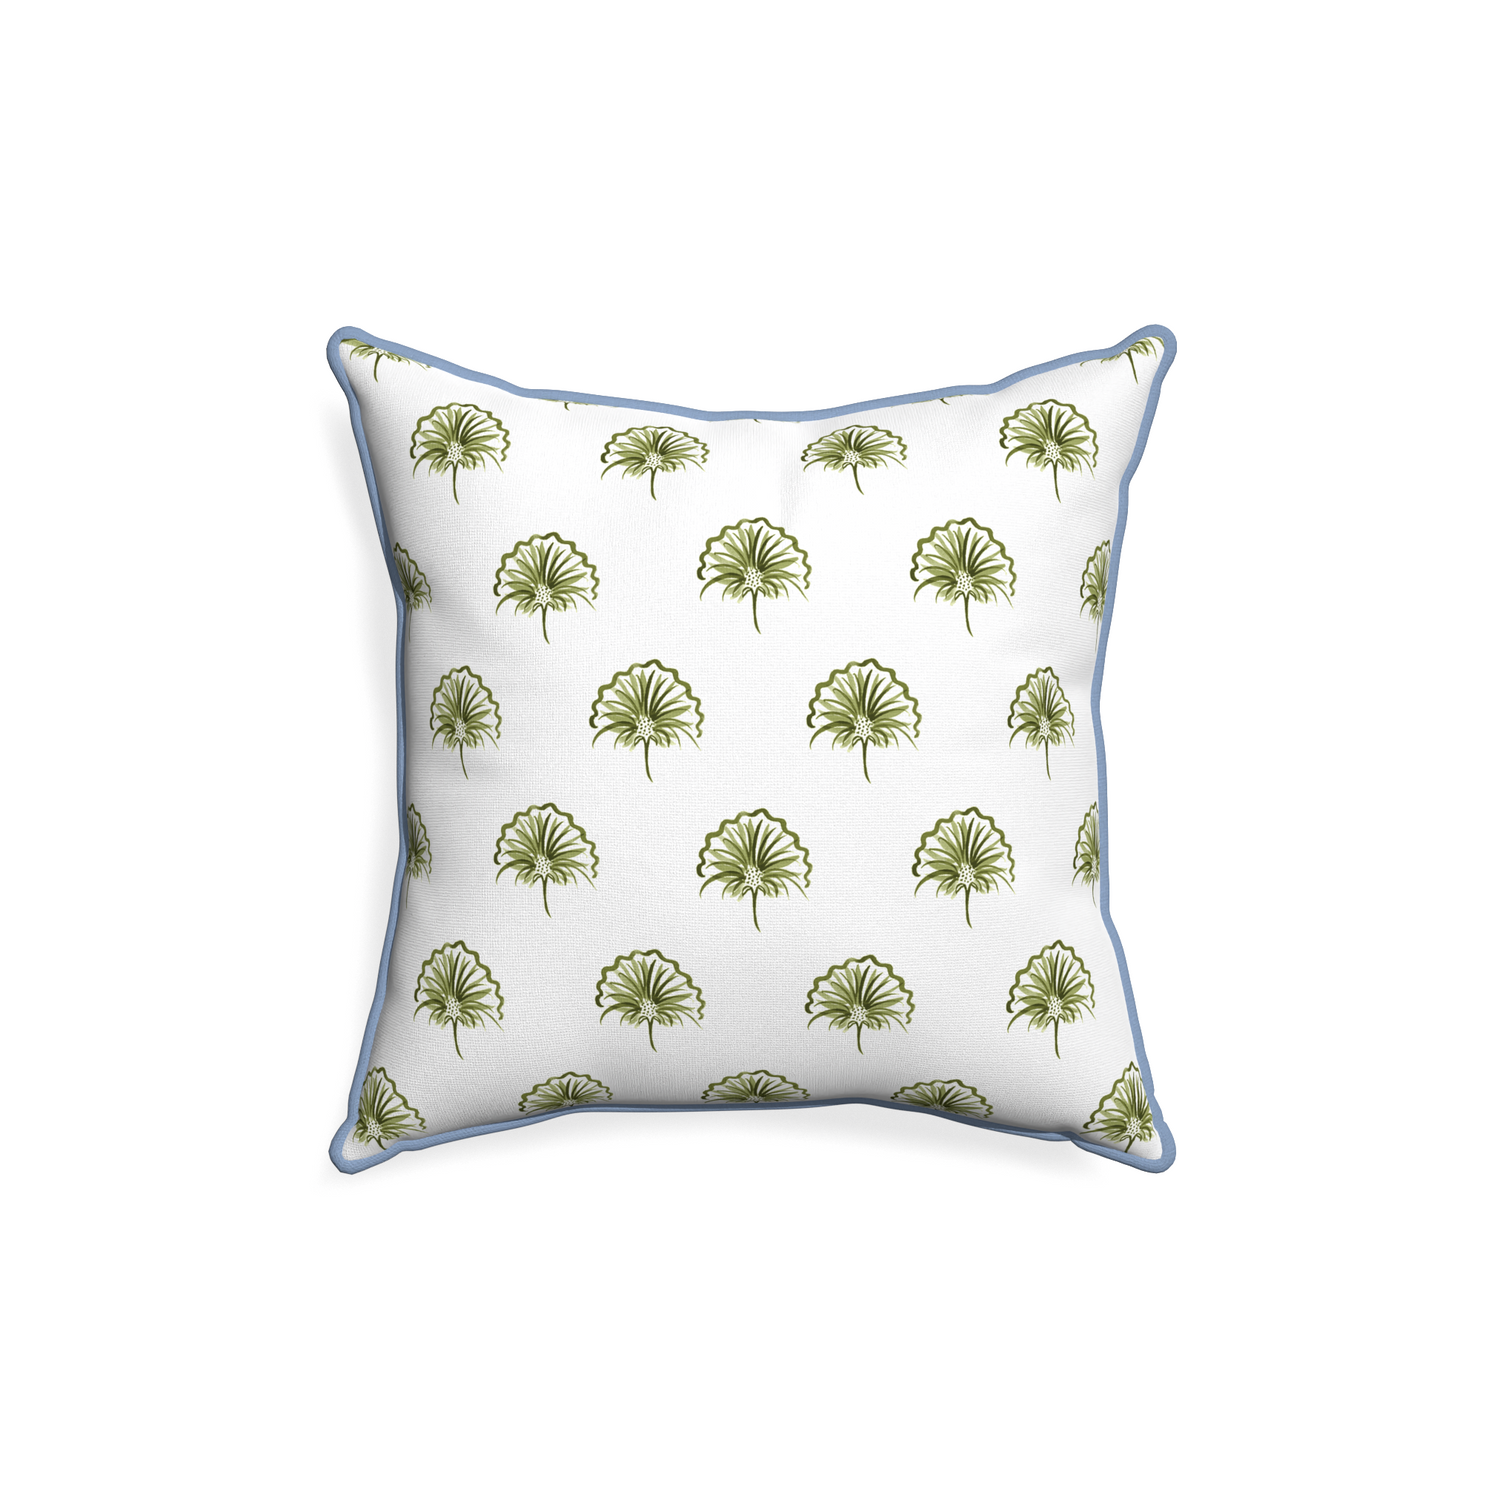 18-square penelope moss custom pillow with sky piping on white background